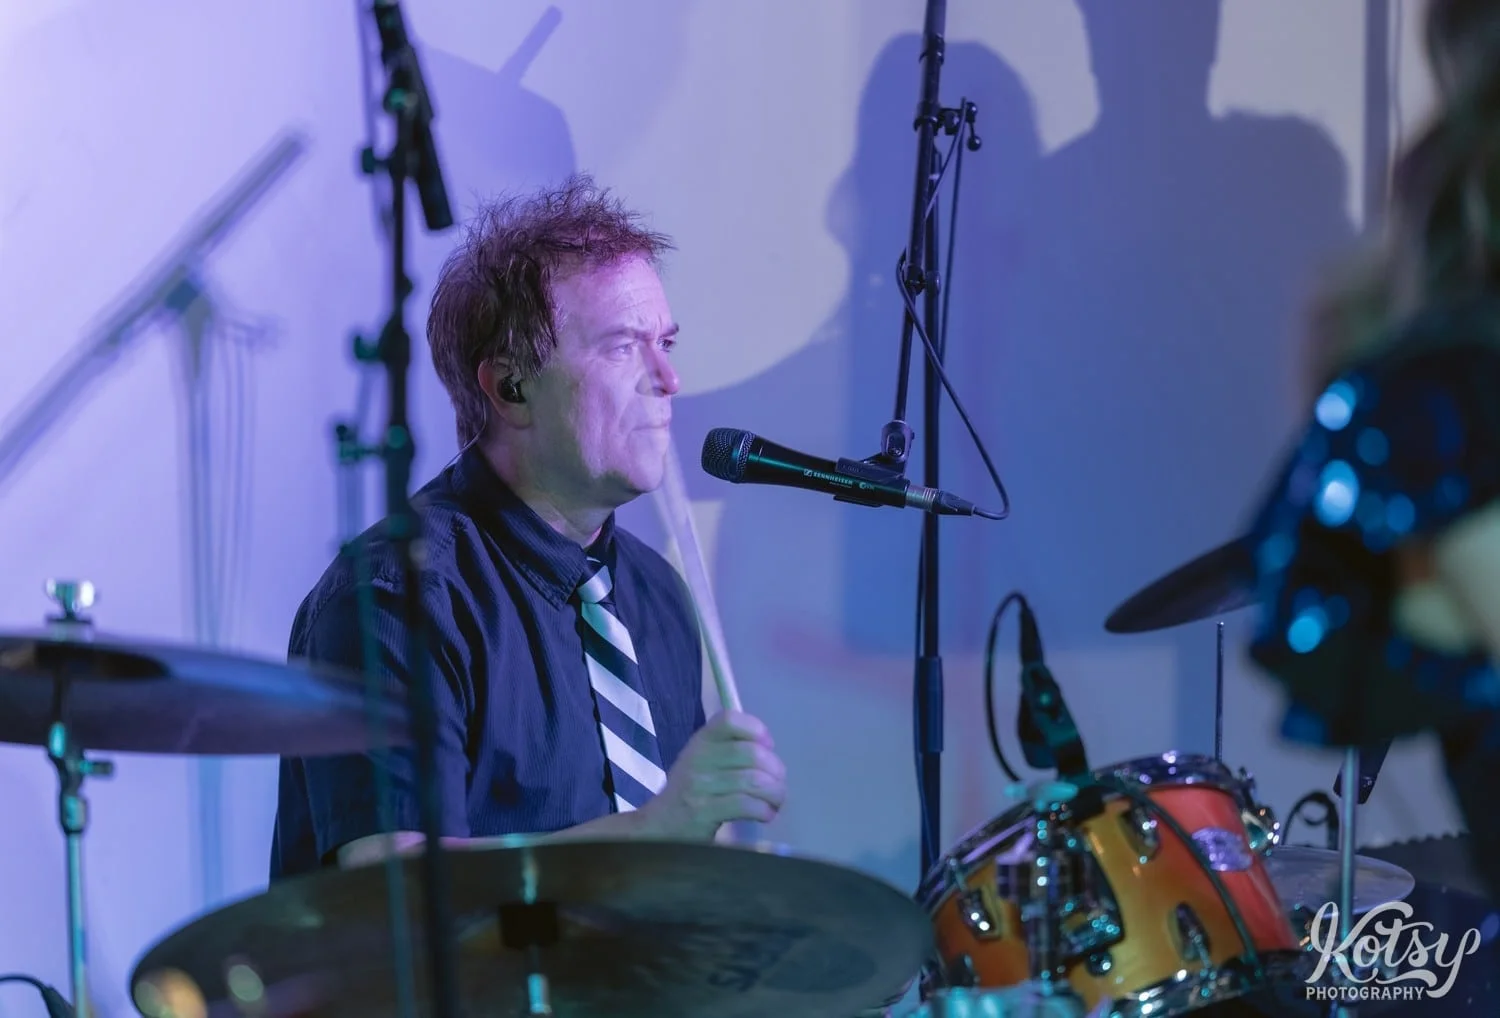 A drummer wearing a black shirt and striped tie plays the drums during a Second Floor Events wedding reception in Toronto, Canada.